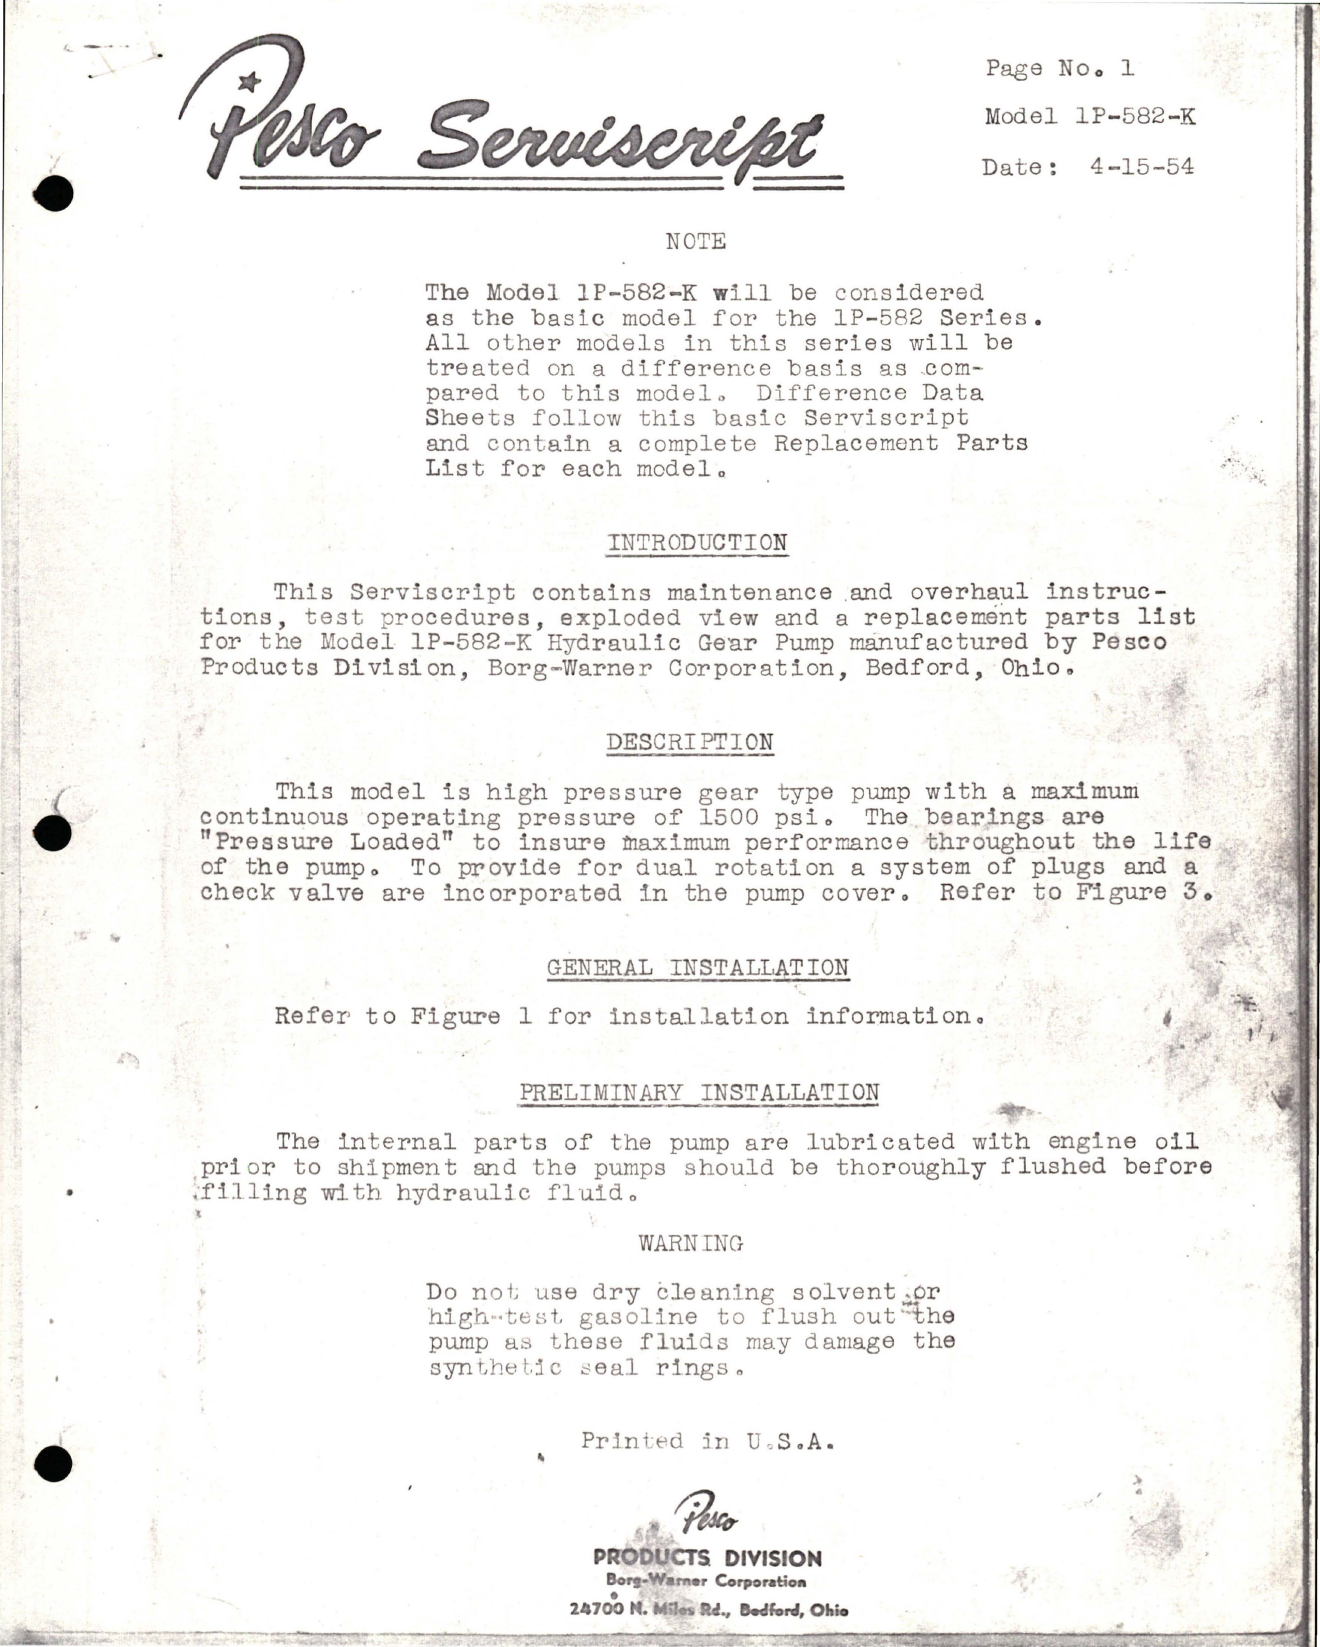 Sample page 1 from AirCorps Library document: Pesco Serviscript Maintenance and Overhaul Instructions with Test Procedures for Hydraulic Gear Pump - Model 1P-582-K